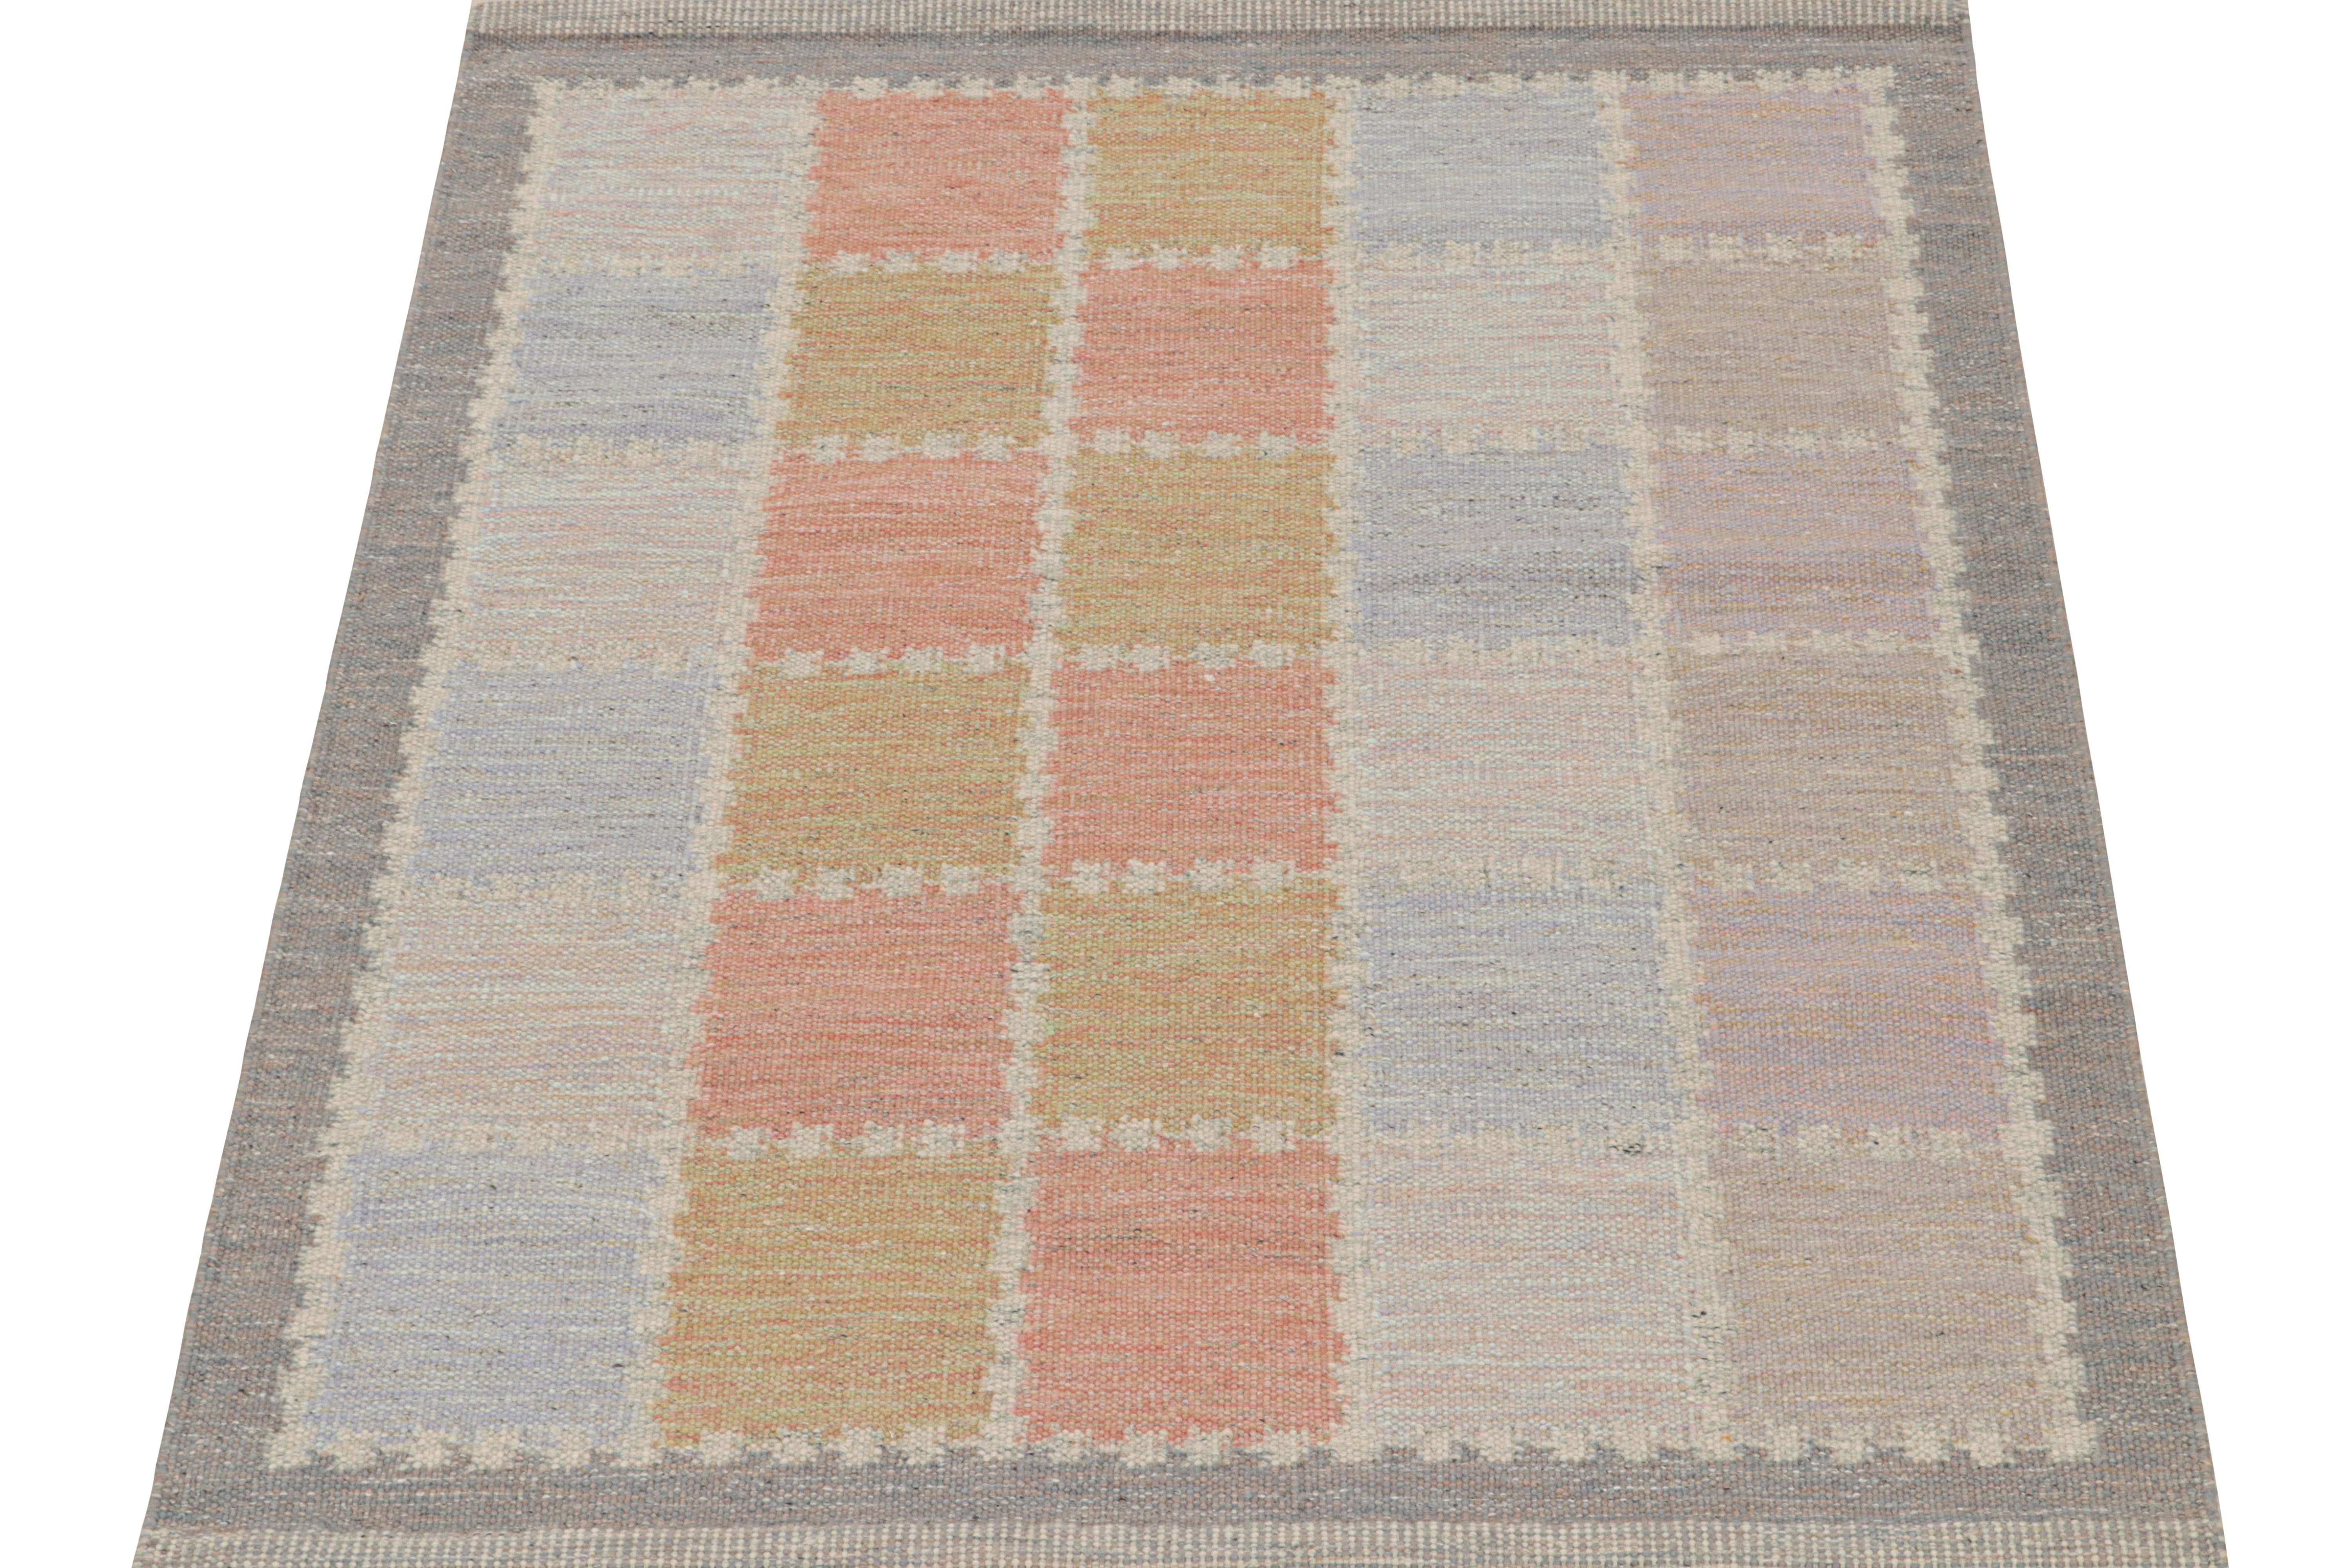 This 6x6 flat weave rug is a new addition to the Scandinavian Kilim collection by Rug & Kilim. Handwoven in wool and natural yarns, its design reflects a contemporary take on mid-century Rollakans and Swedish Deco style.

On the Design:

This